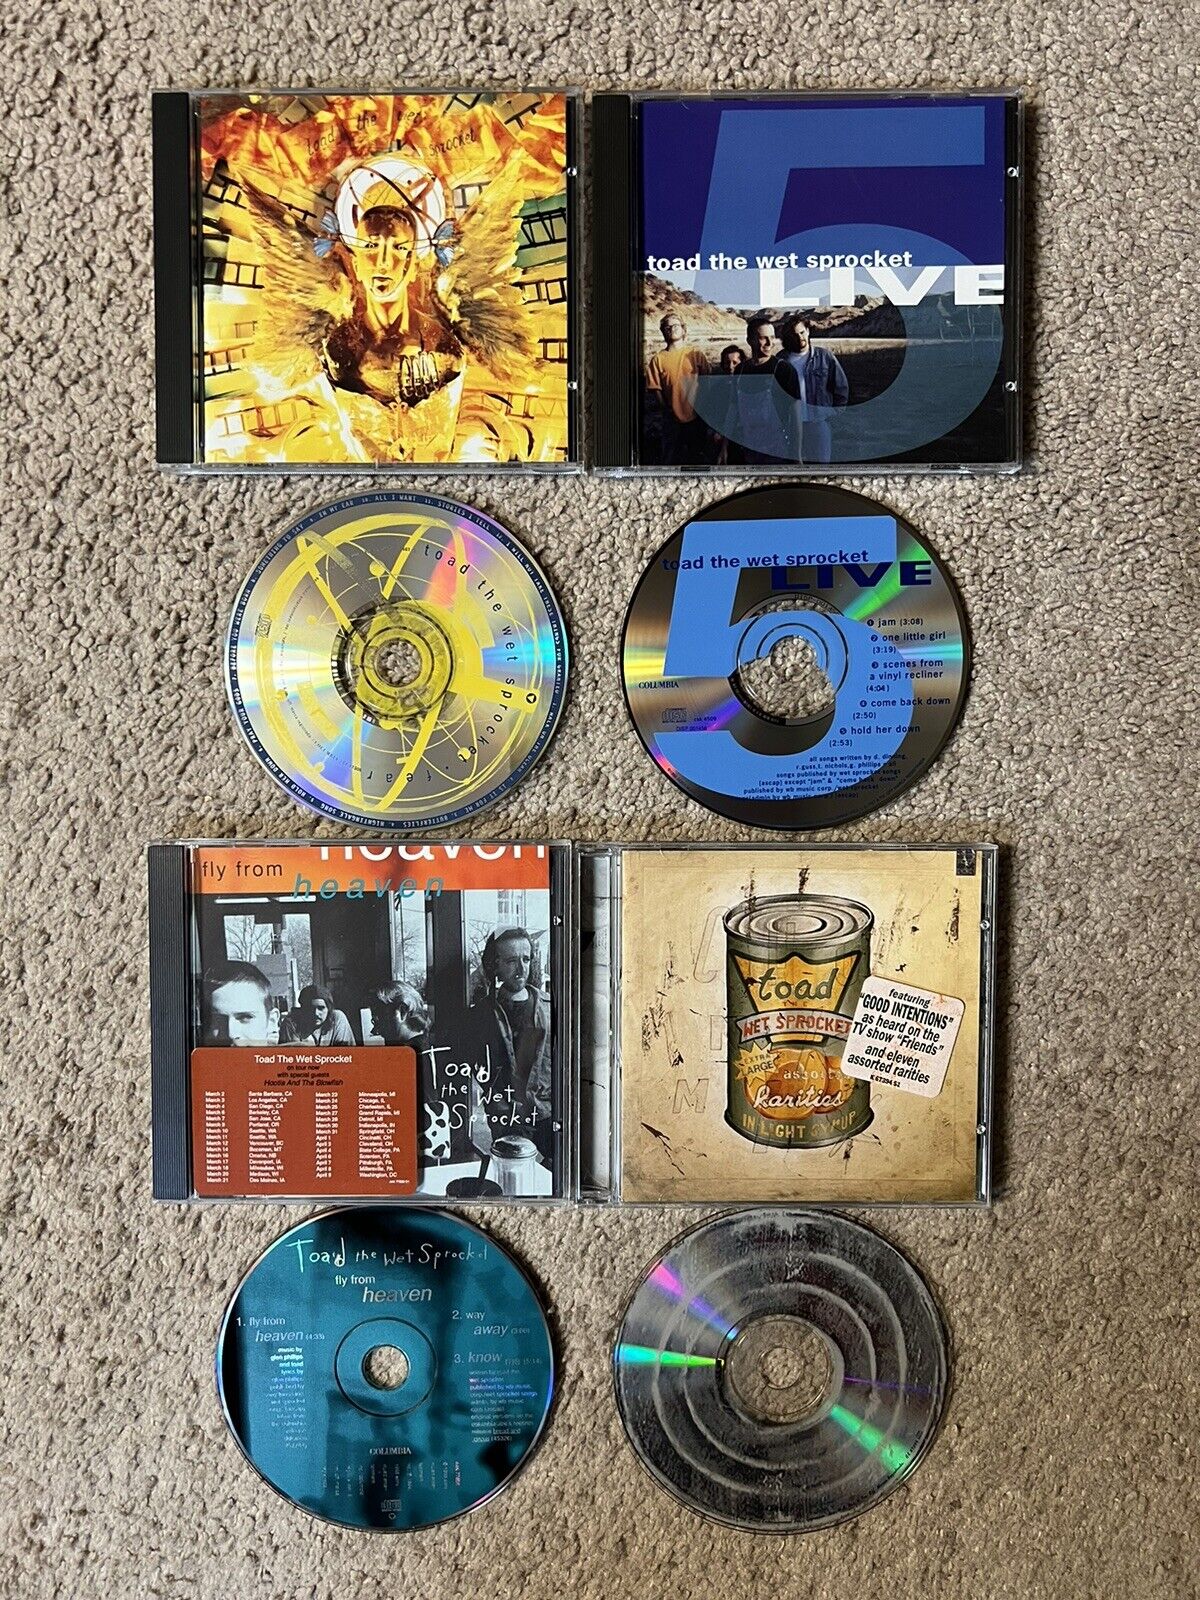 Toad The Wet Sprocket 4 Cd Lot Fear 5 Live In Light Syrup Fly From Heaven Promo